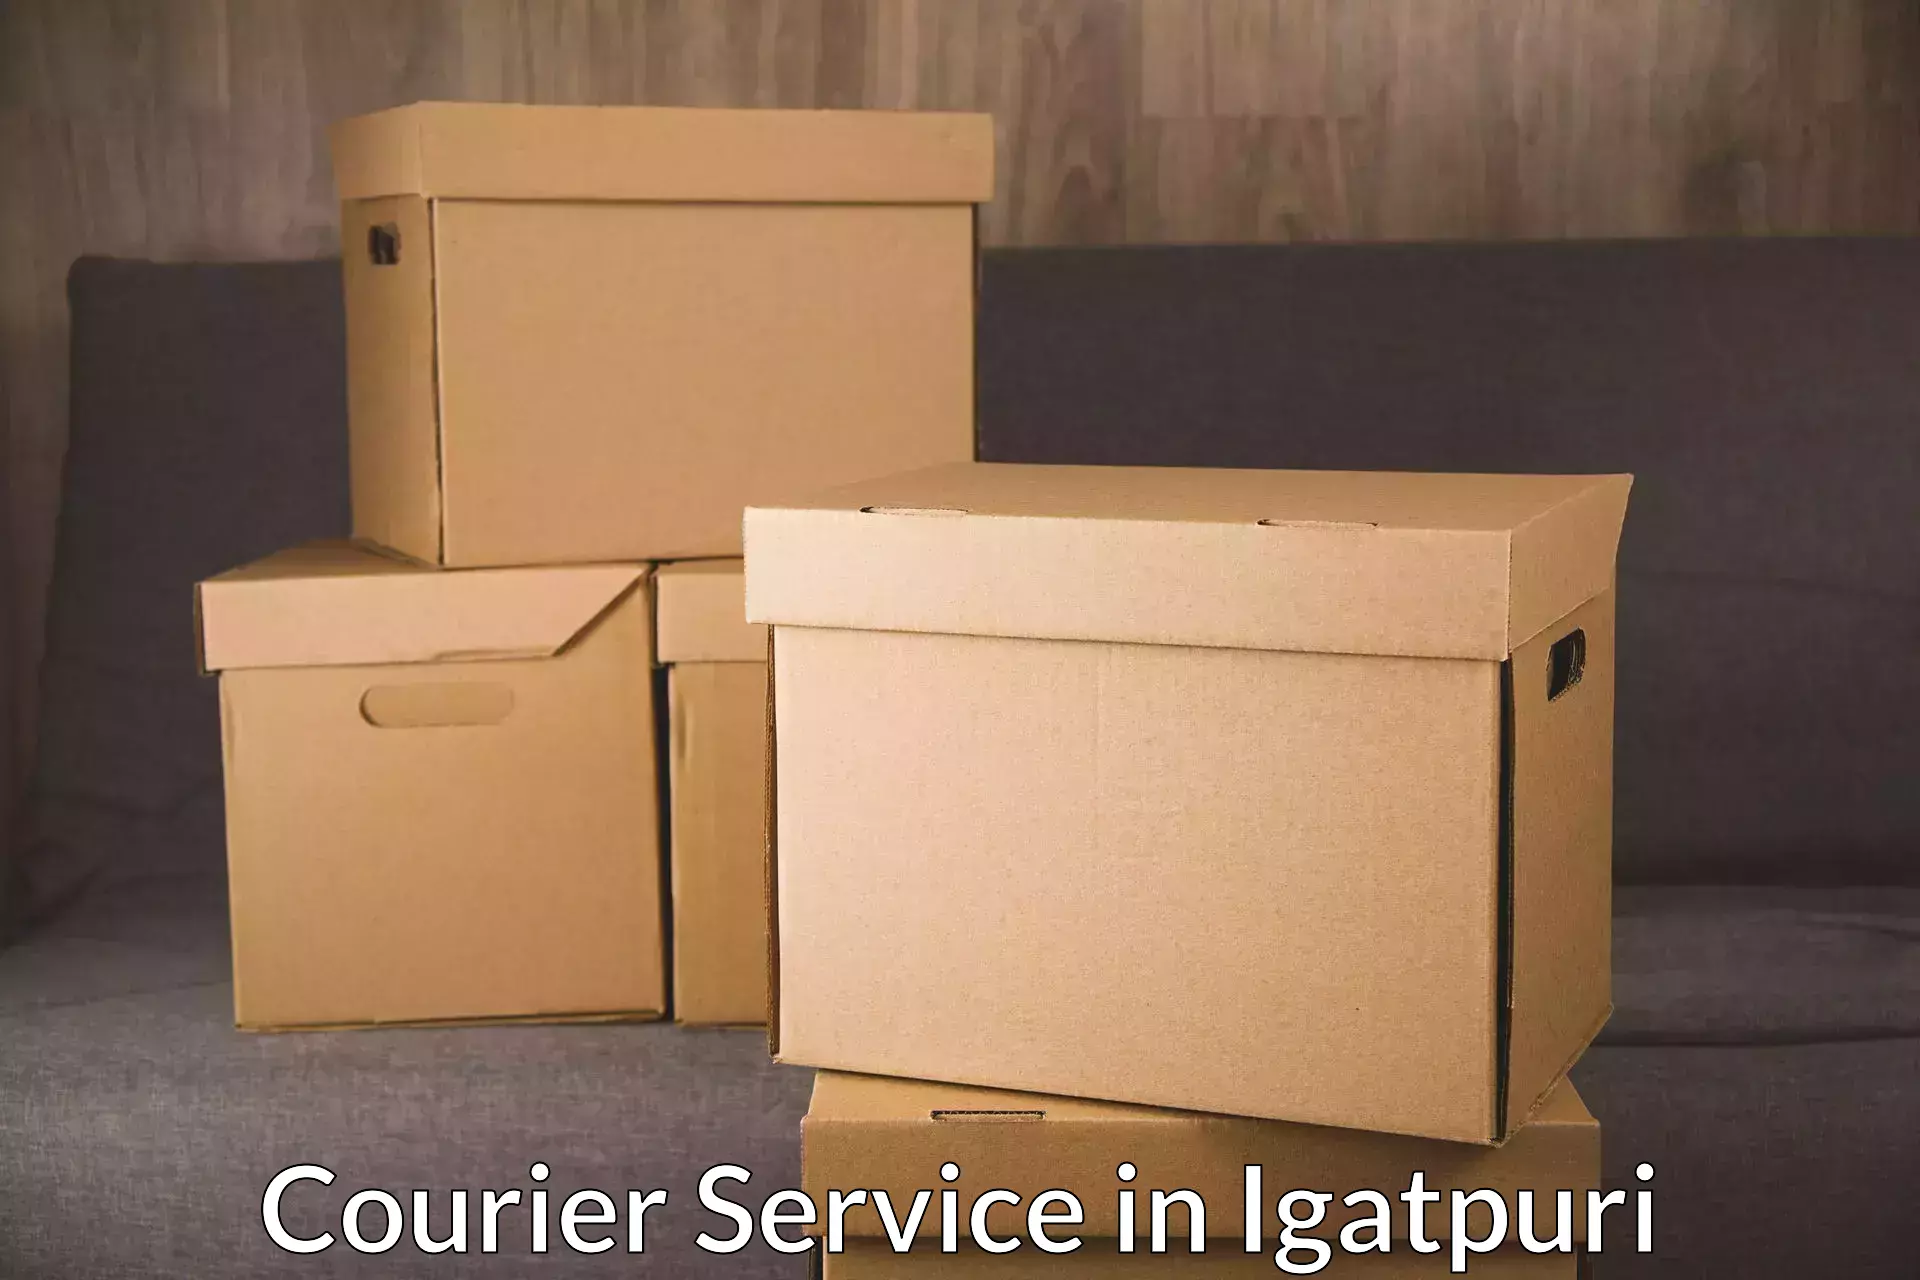 Integrated courier services in Igatpuri